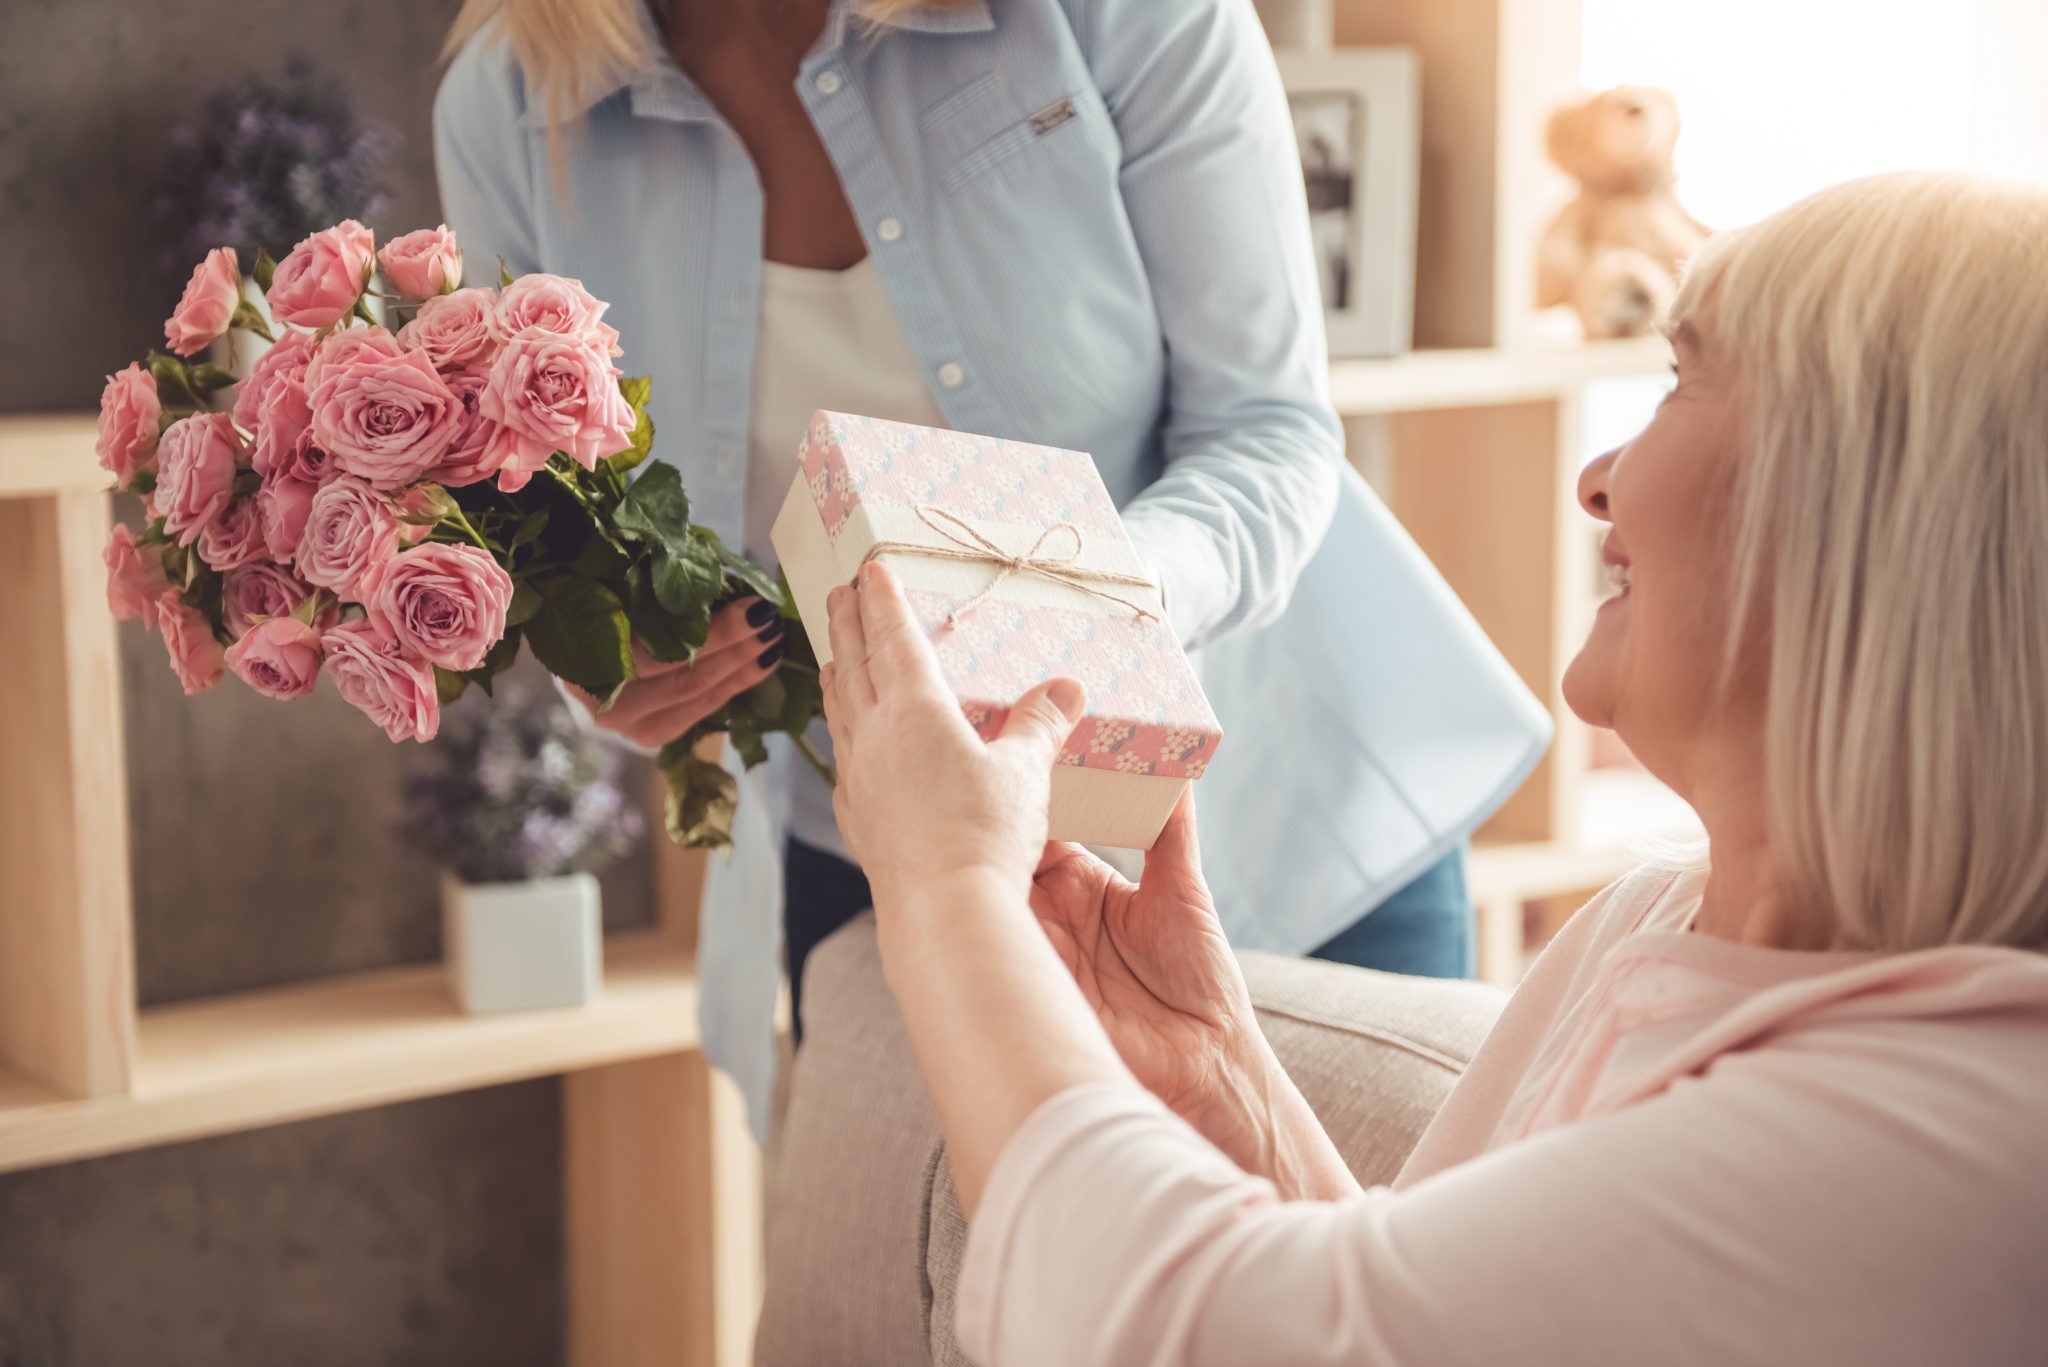 What To Get Your Mom For Mother's Day Based On Her Personality: Part 1